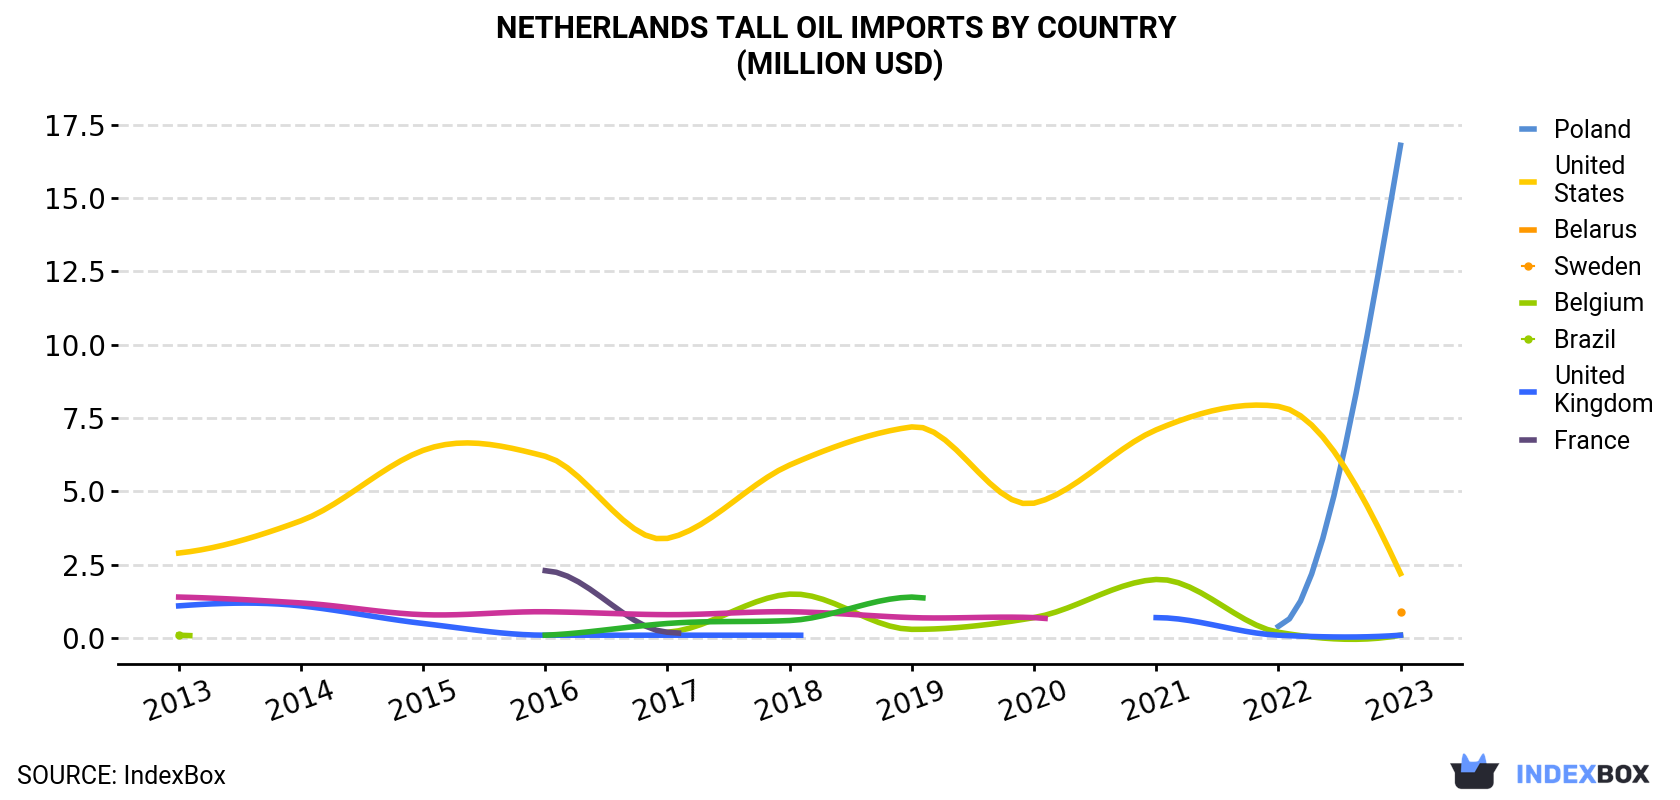 Netherlands Tall Oil Imports By Country (Million USD)